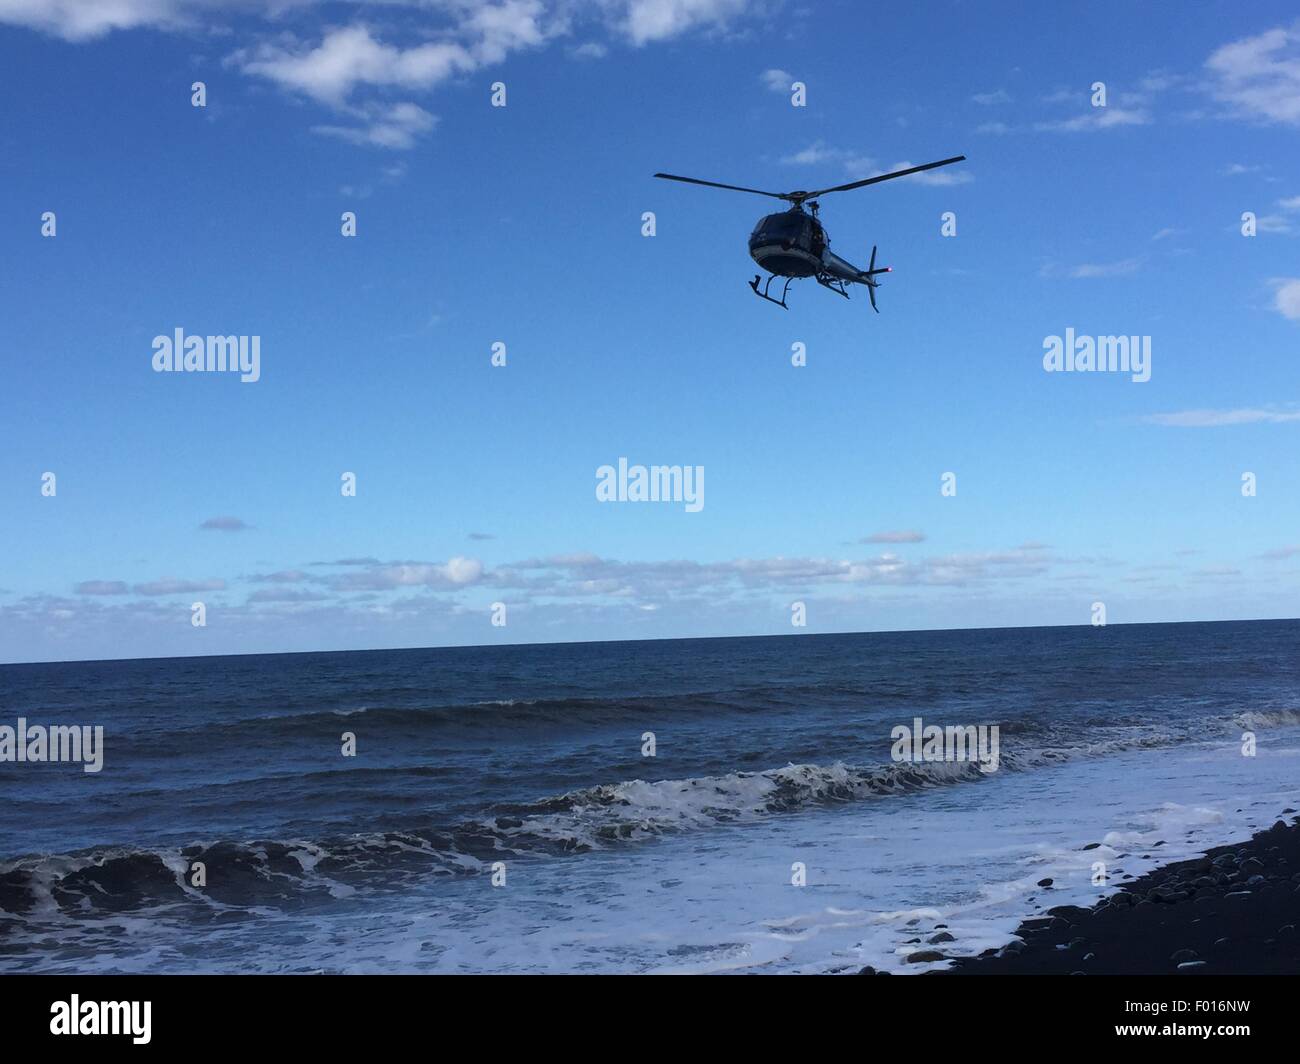 The Reunion Island. 30th July, 2015. A helicopter searchs over the sea on Reunion Island, on Jul.30, 2015. Verification had confirmed that the debris discovered on Reunion Island belongs to missing Malaysian Airlines flight MH370, Malaysian Prime Minister Najib Razak announced early Thursday. © Romain Latournerie/Xinhua/Alamy Live News Stock Photo